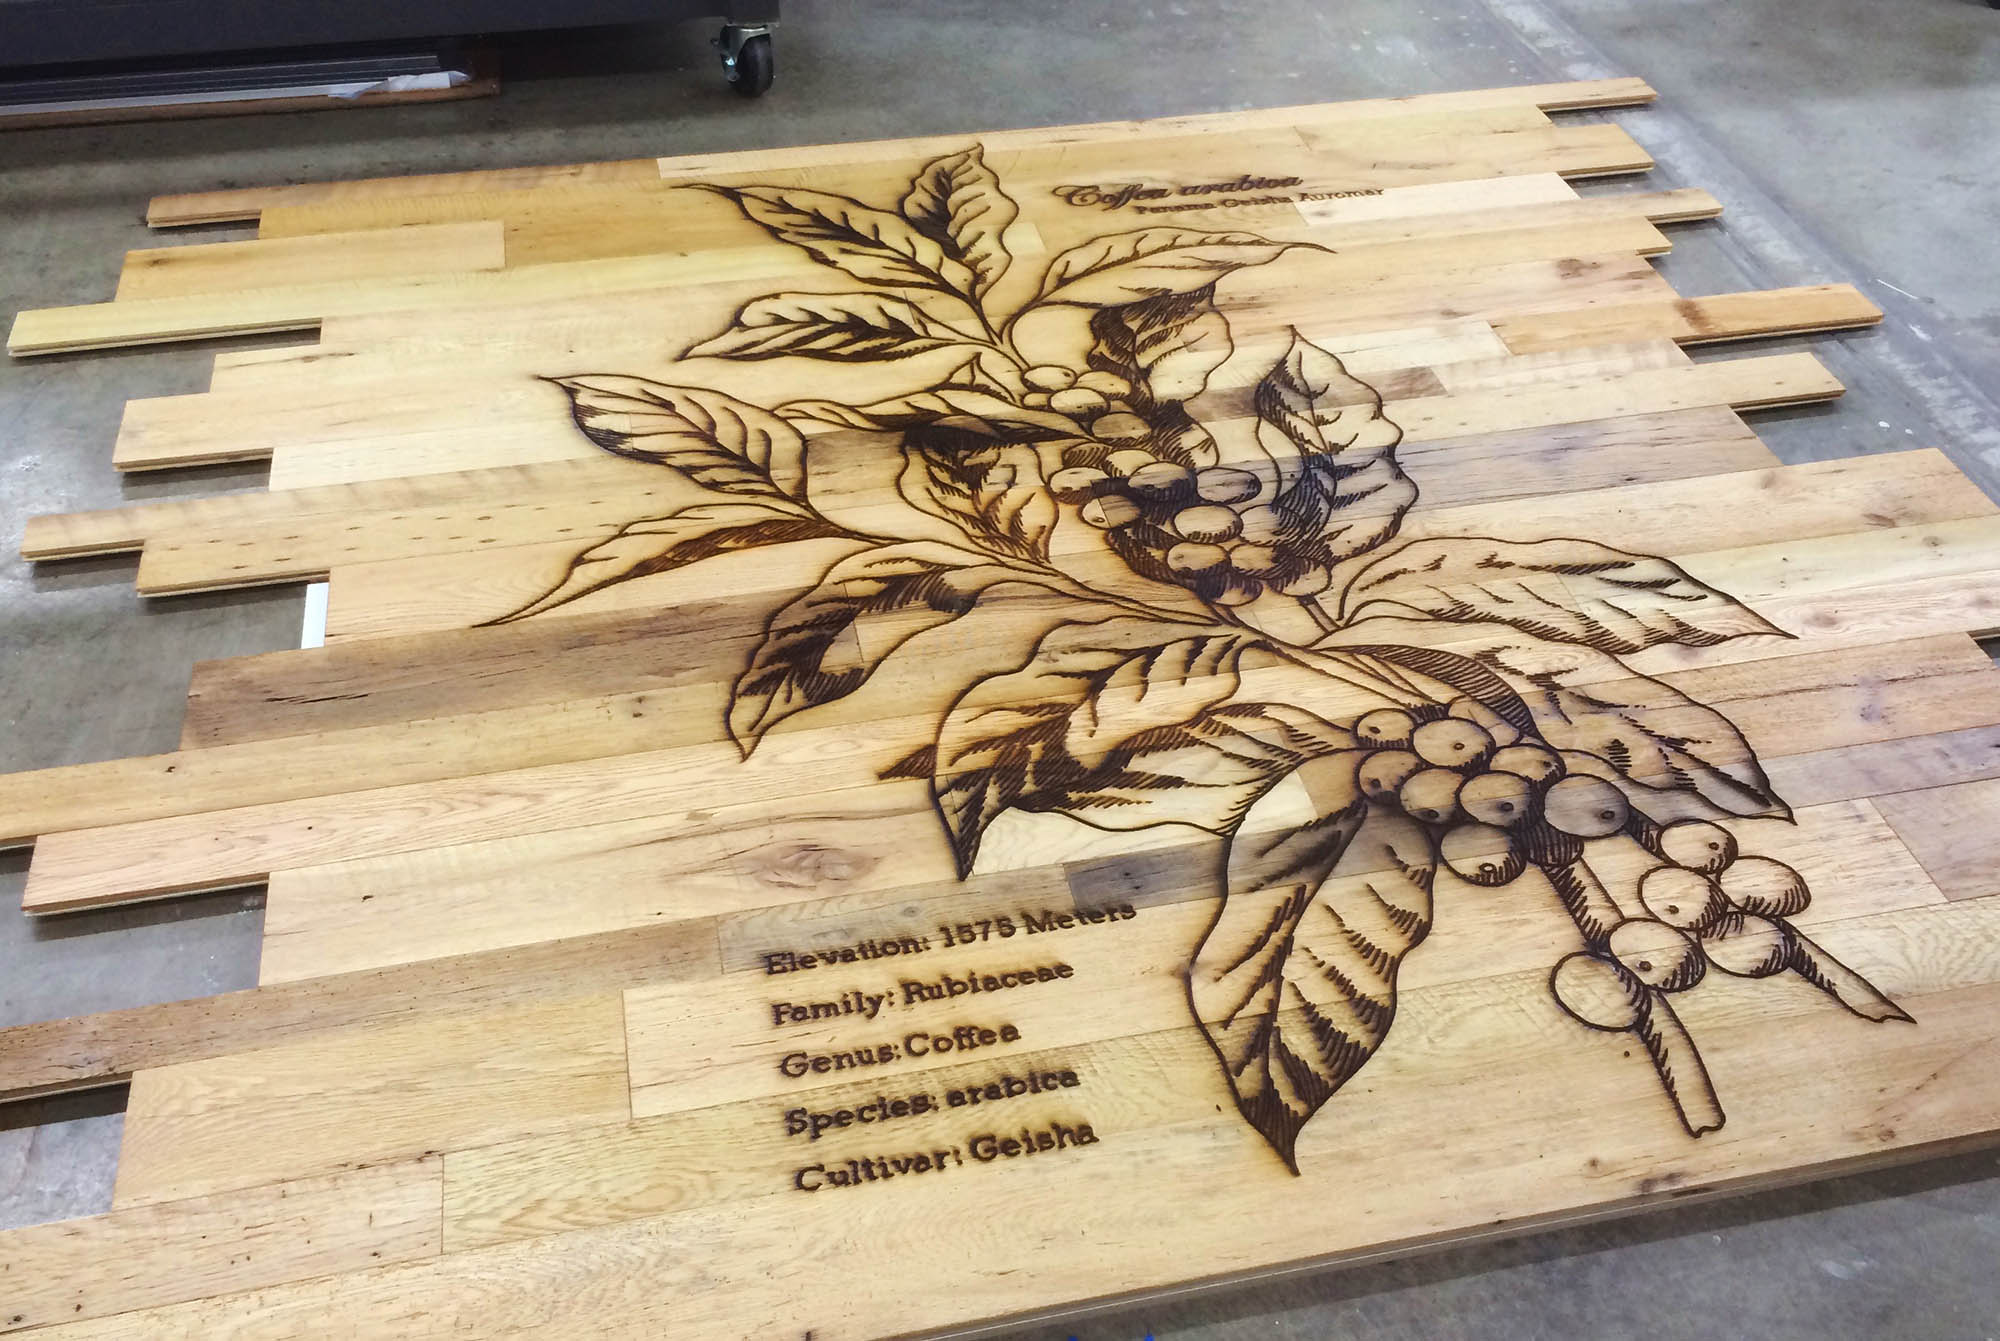 Thin Alder Wood For Laser Engraving/Cutting - What is the best wood for laser  engraving?